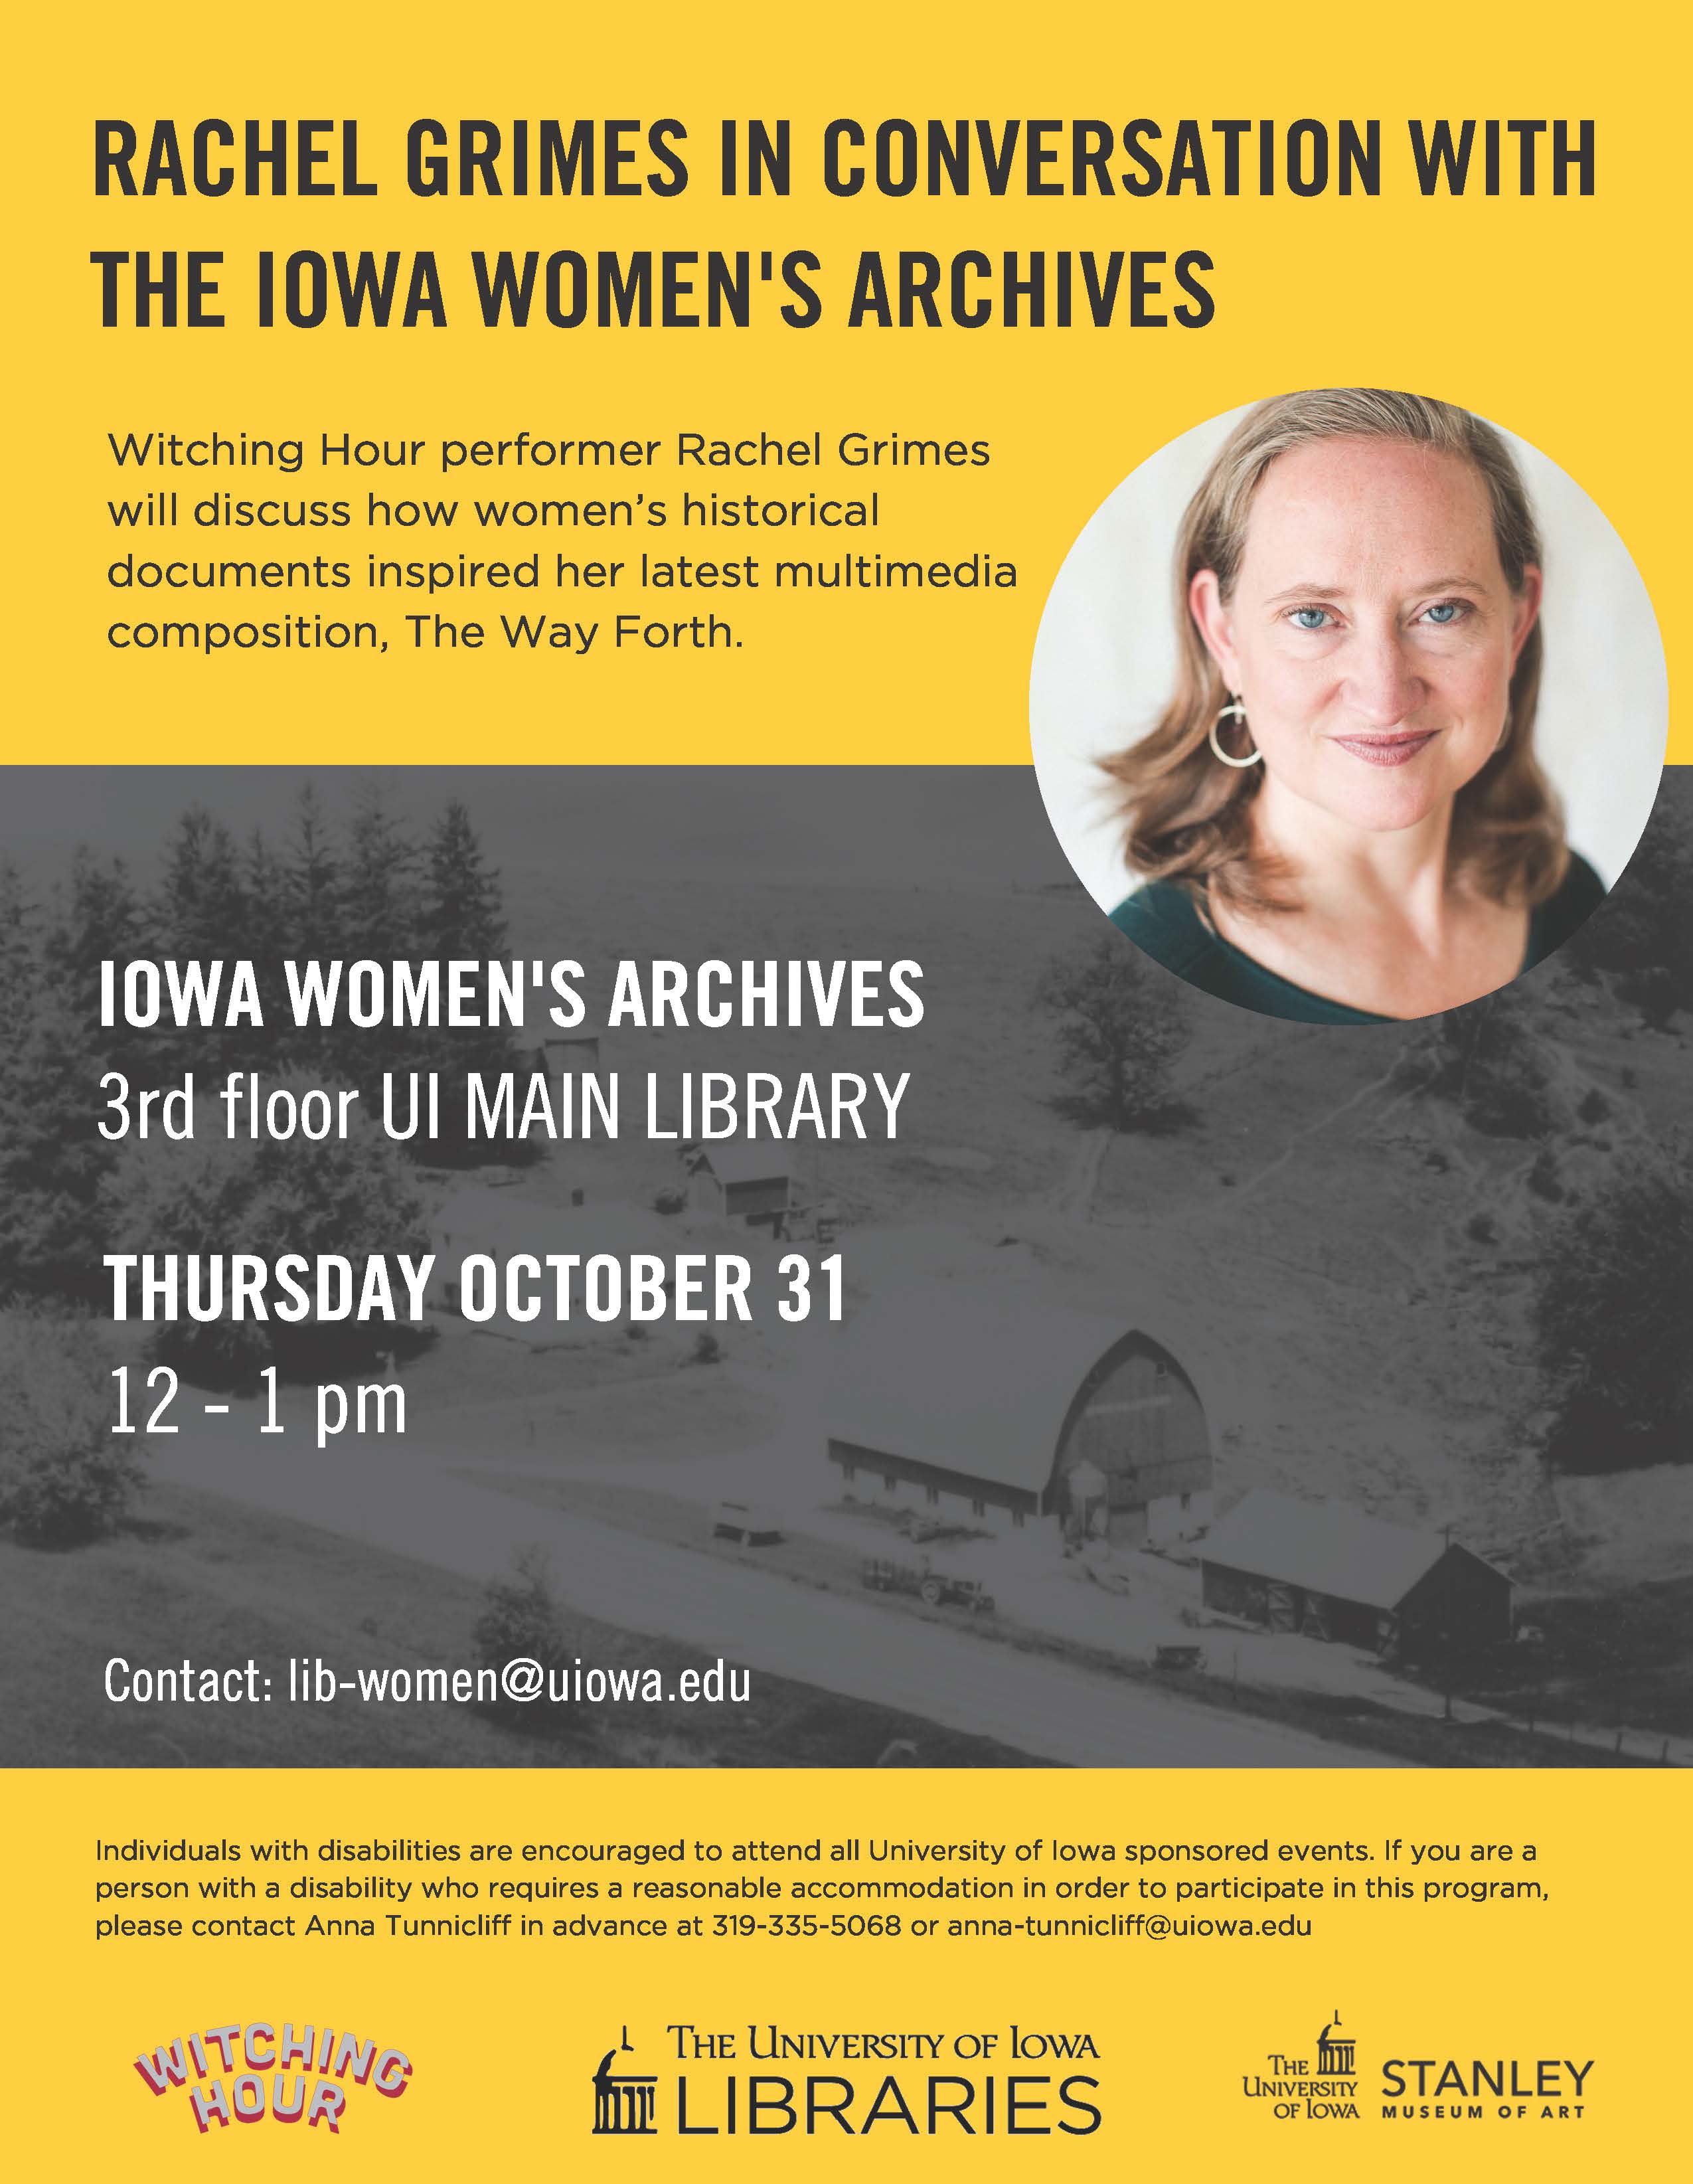 Rachel Grimes in Conversation with The Iowa Women's Archives